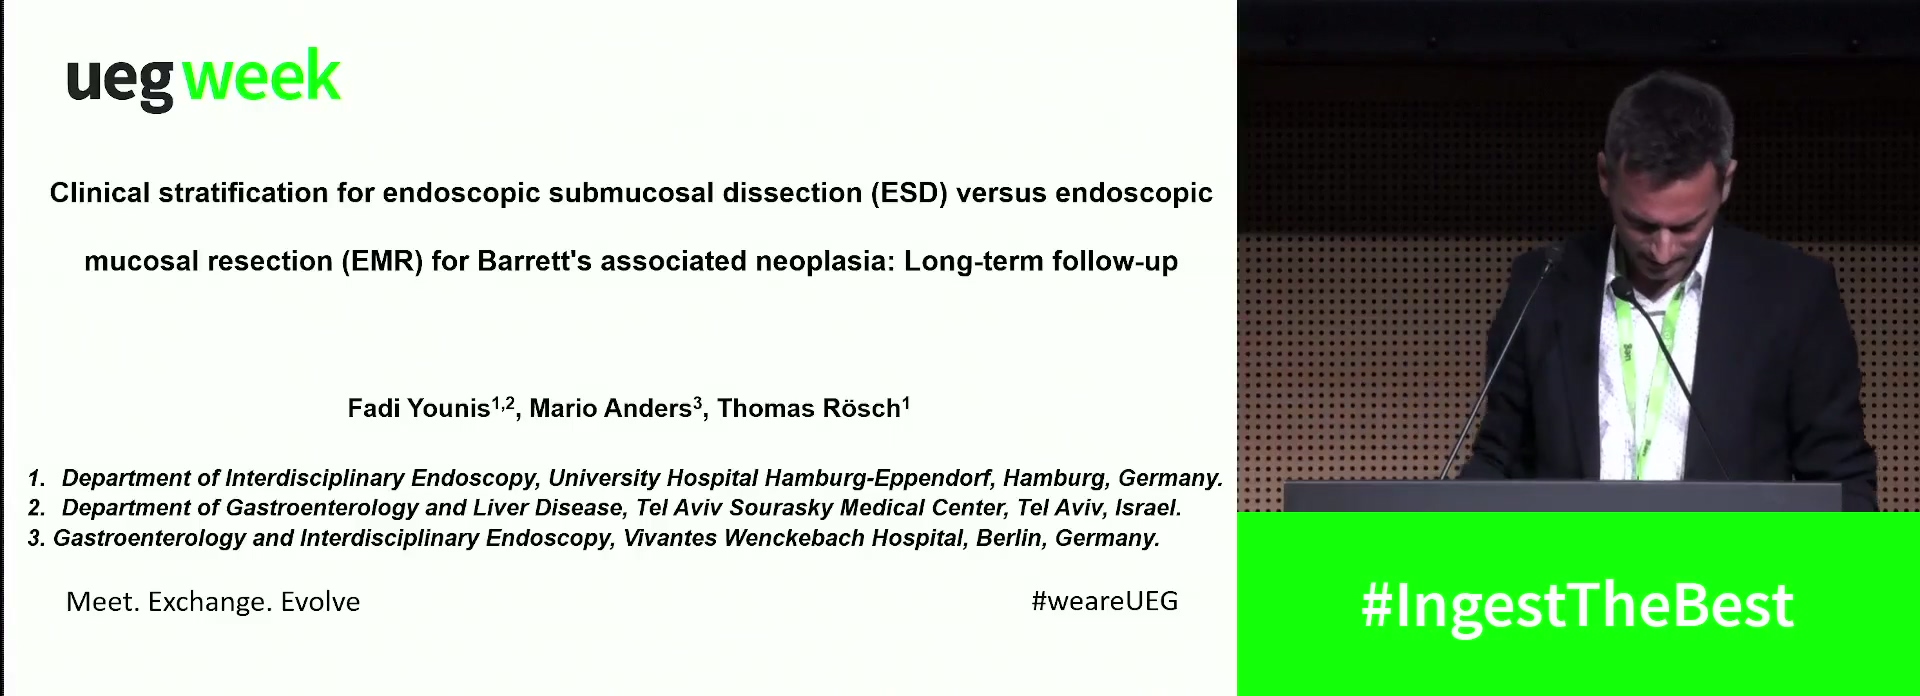 CLINICAL STRATIFICATION FOR ENDOSCOPIC SUBMUCOSAL DISSECTION VERSUS ENDOSCOPIC MUCOSAL RESECTION FOR BARRETT'S ASSOCIATED NEOPLASIA: LONG-TERM FOLLOW-UP